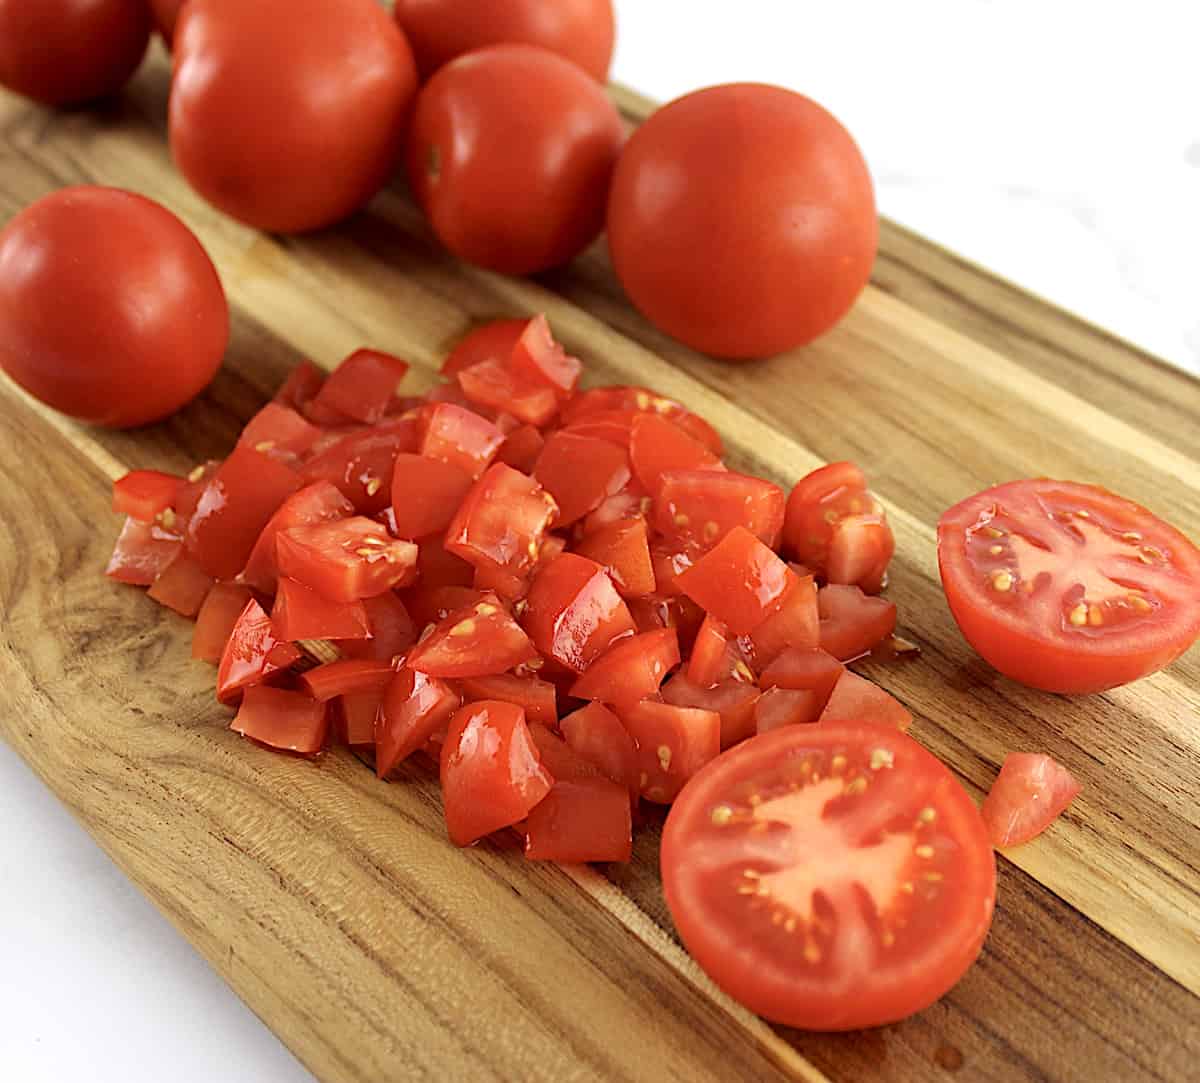 diced tomatoes on cutting board with whole tomatoes in background